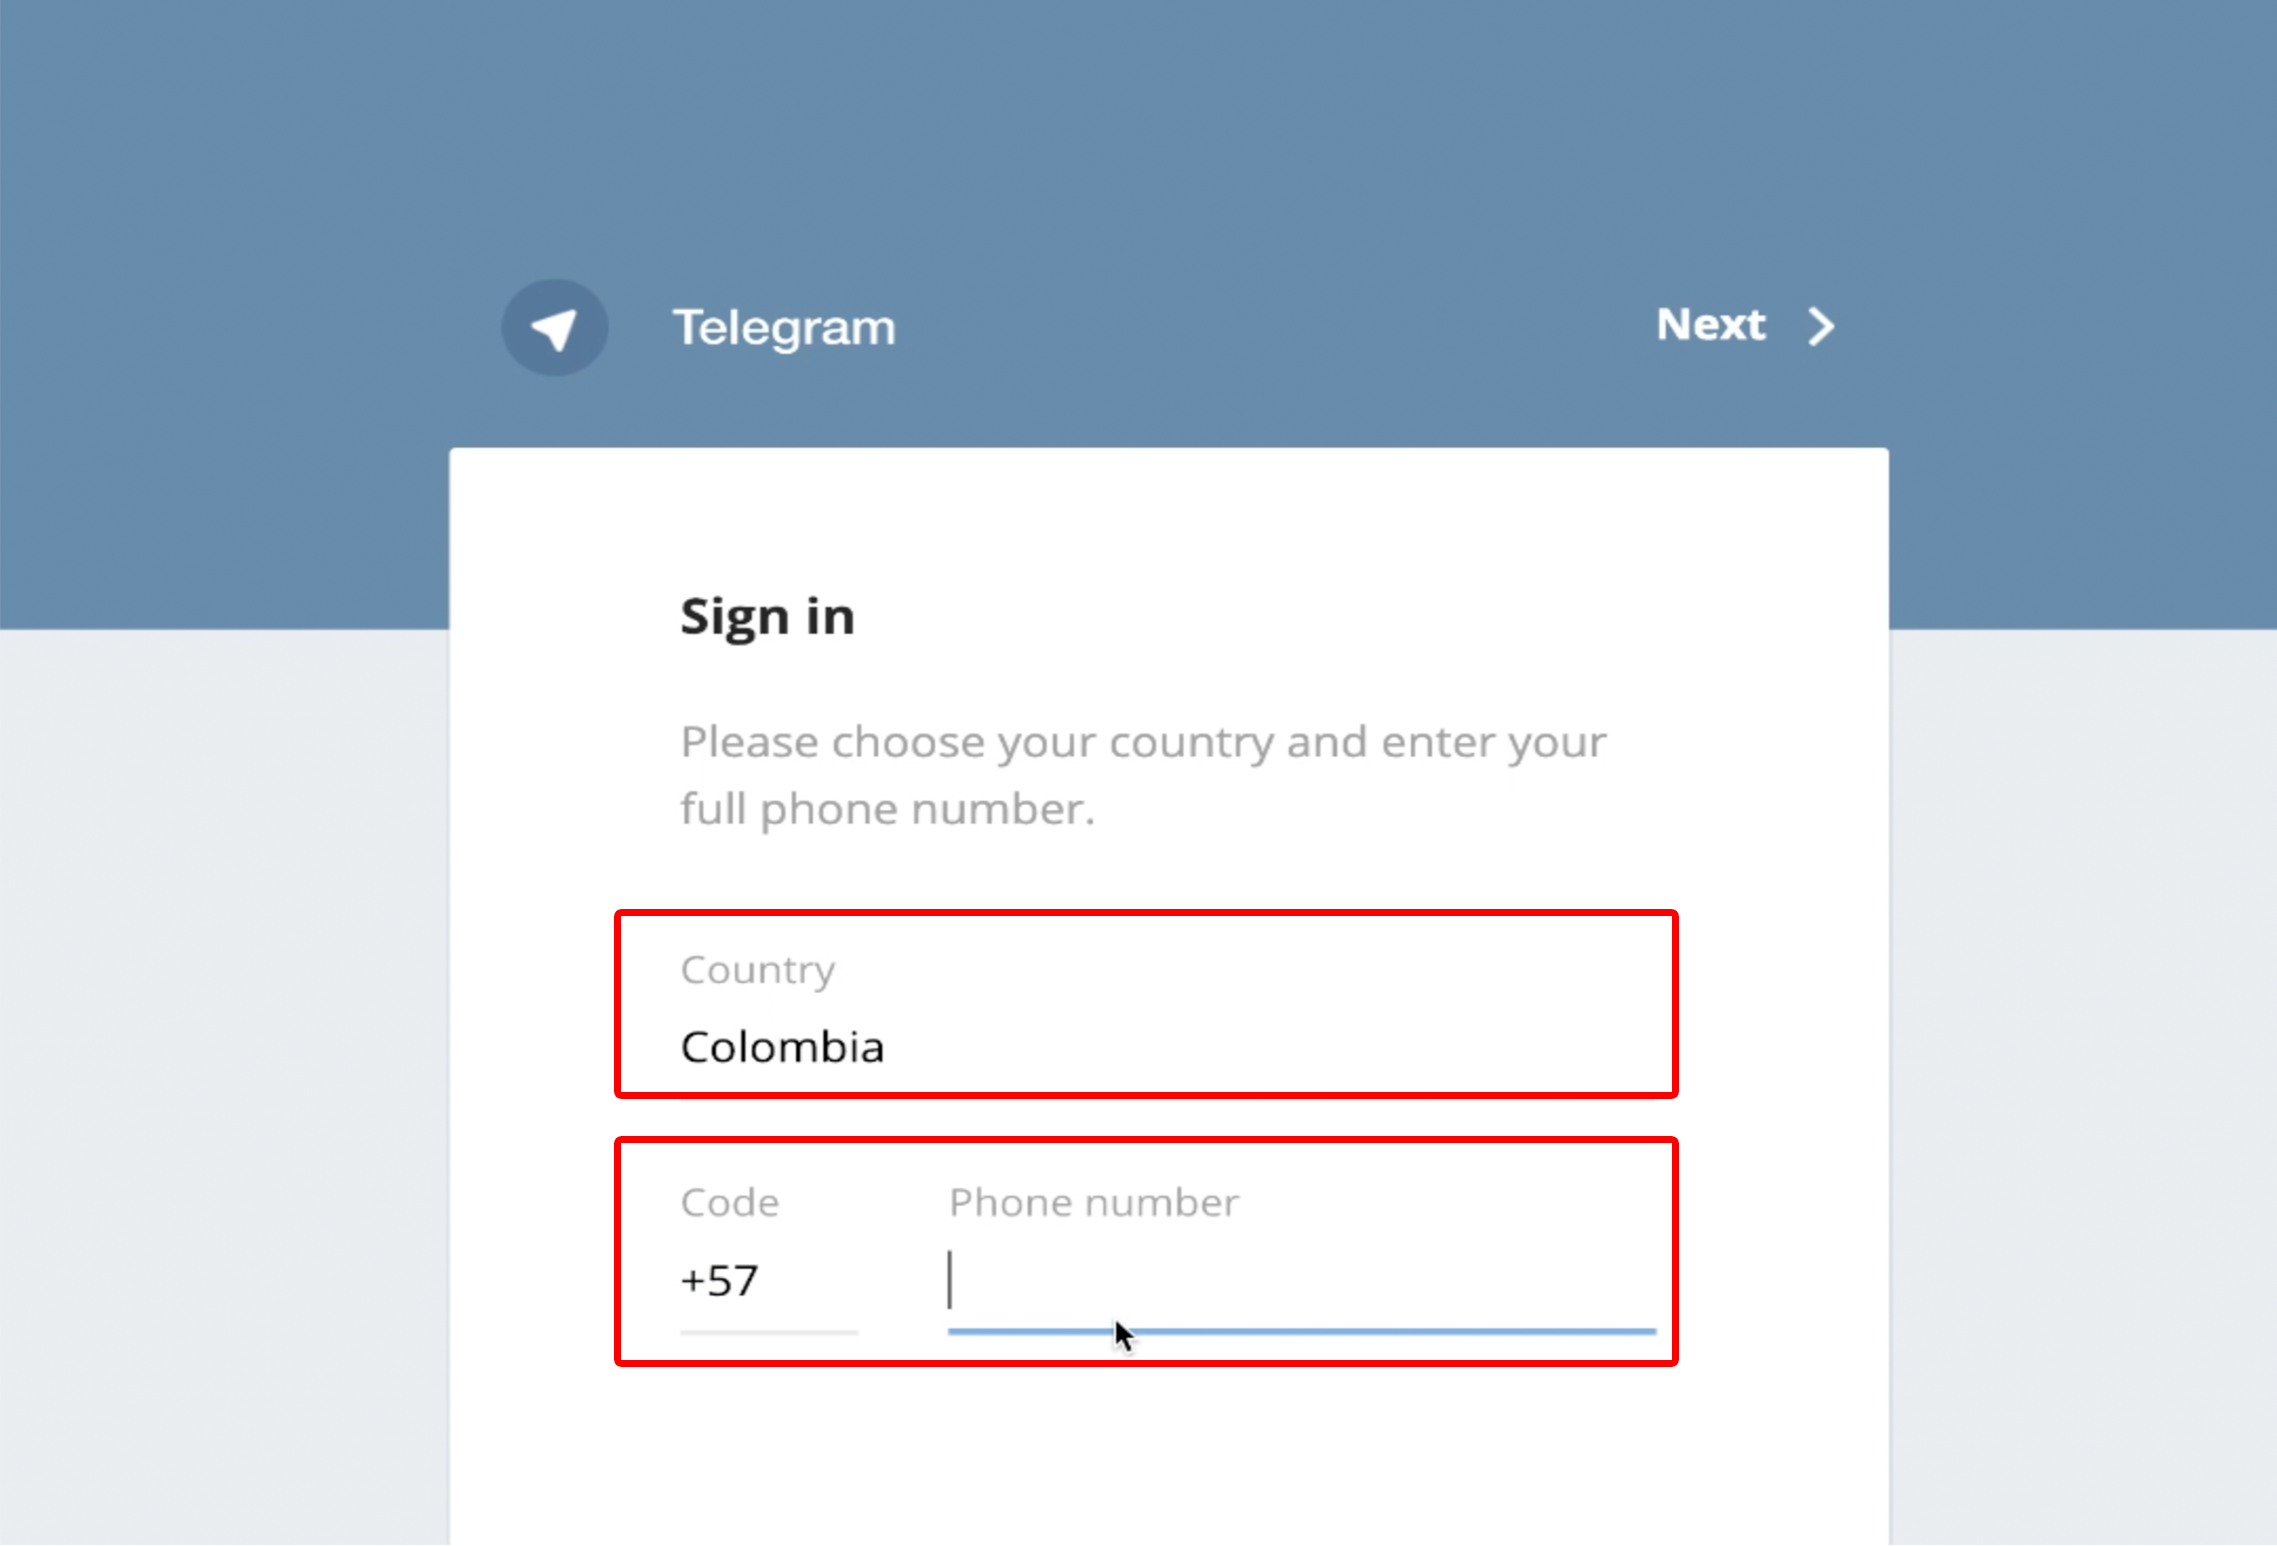 Select your country of residence and write your phone number.